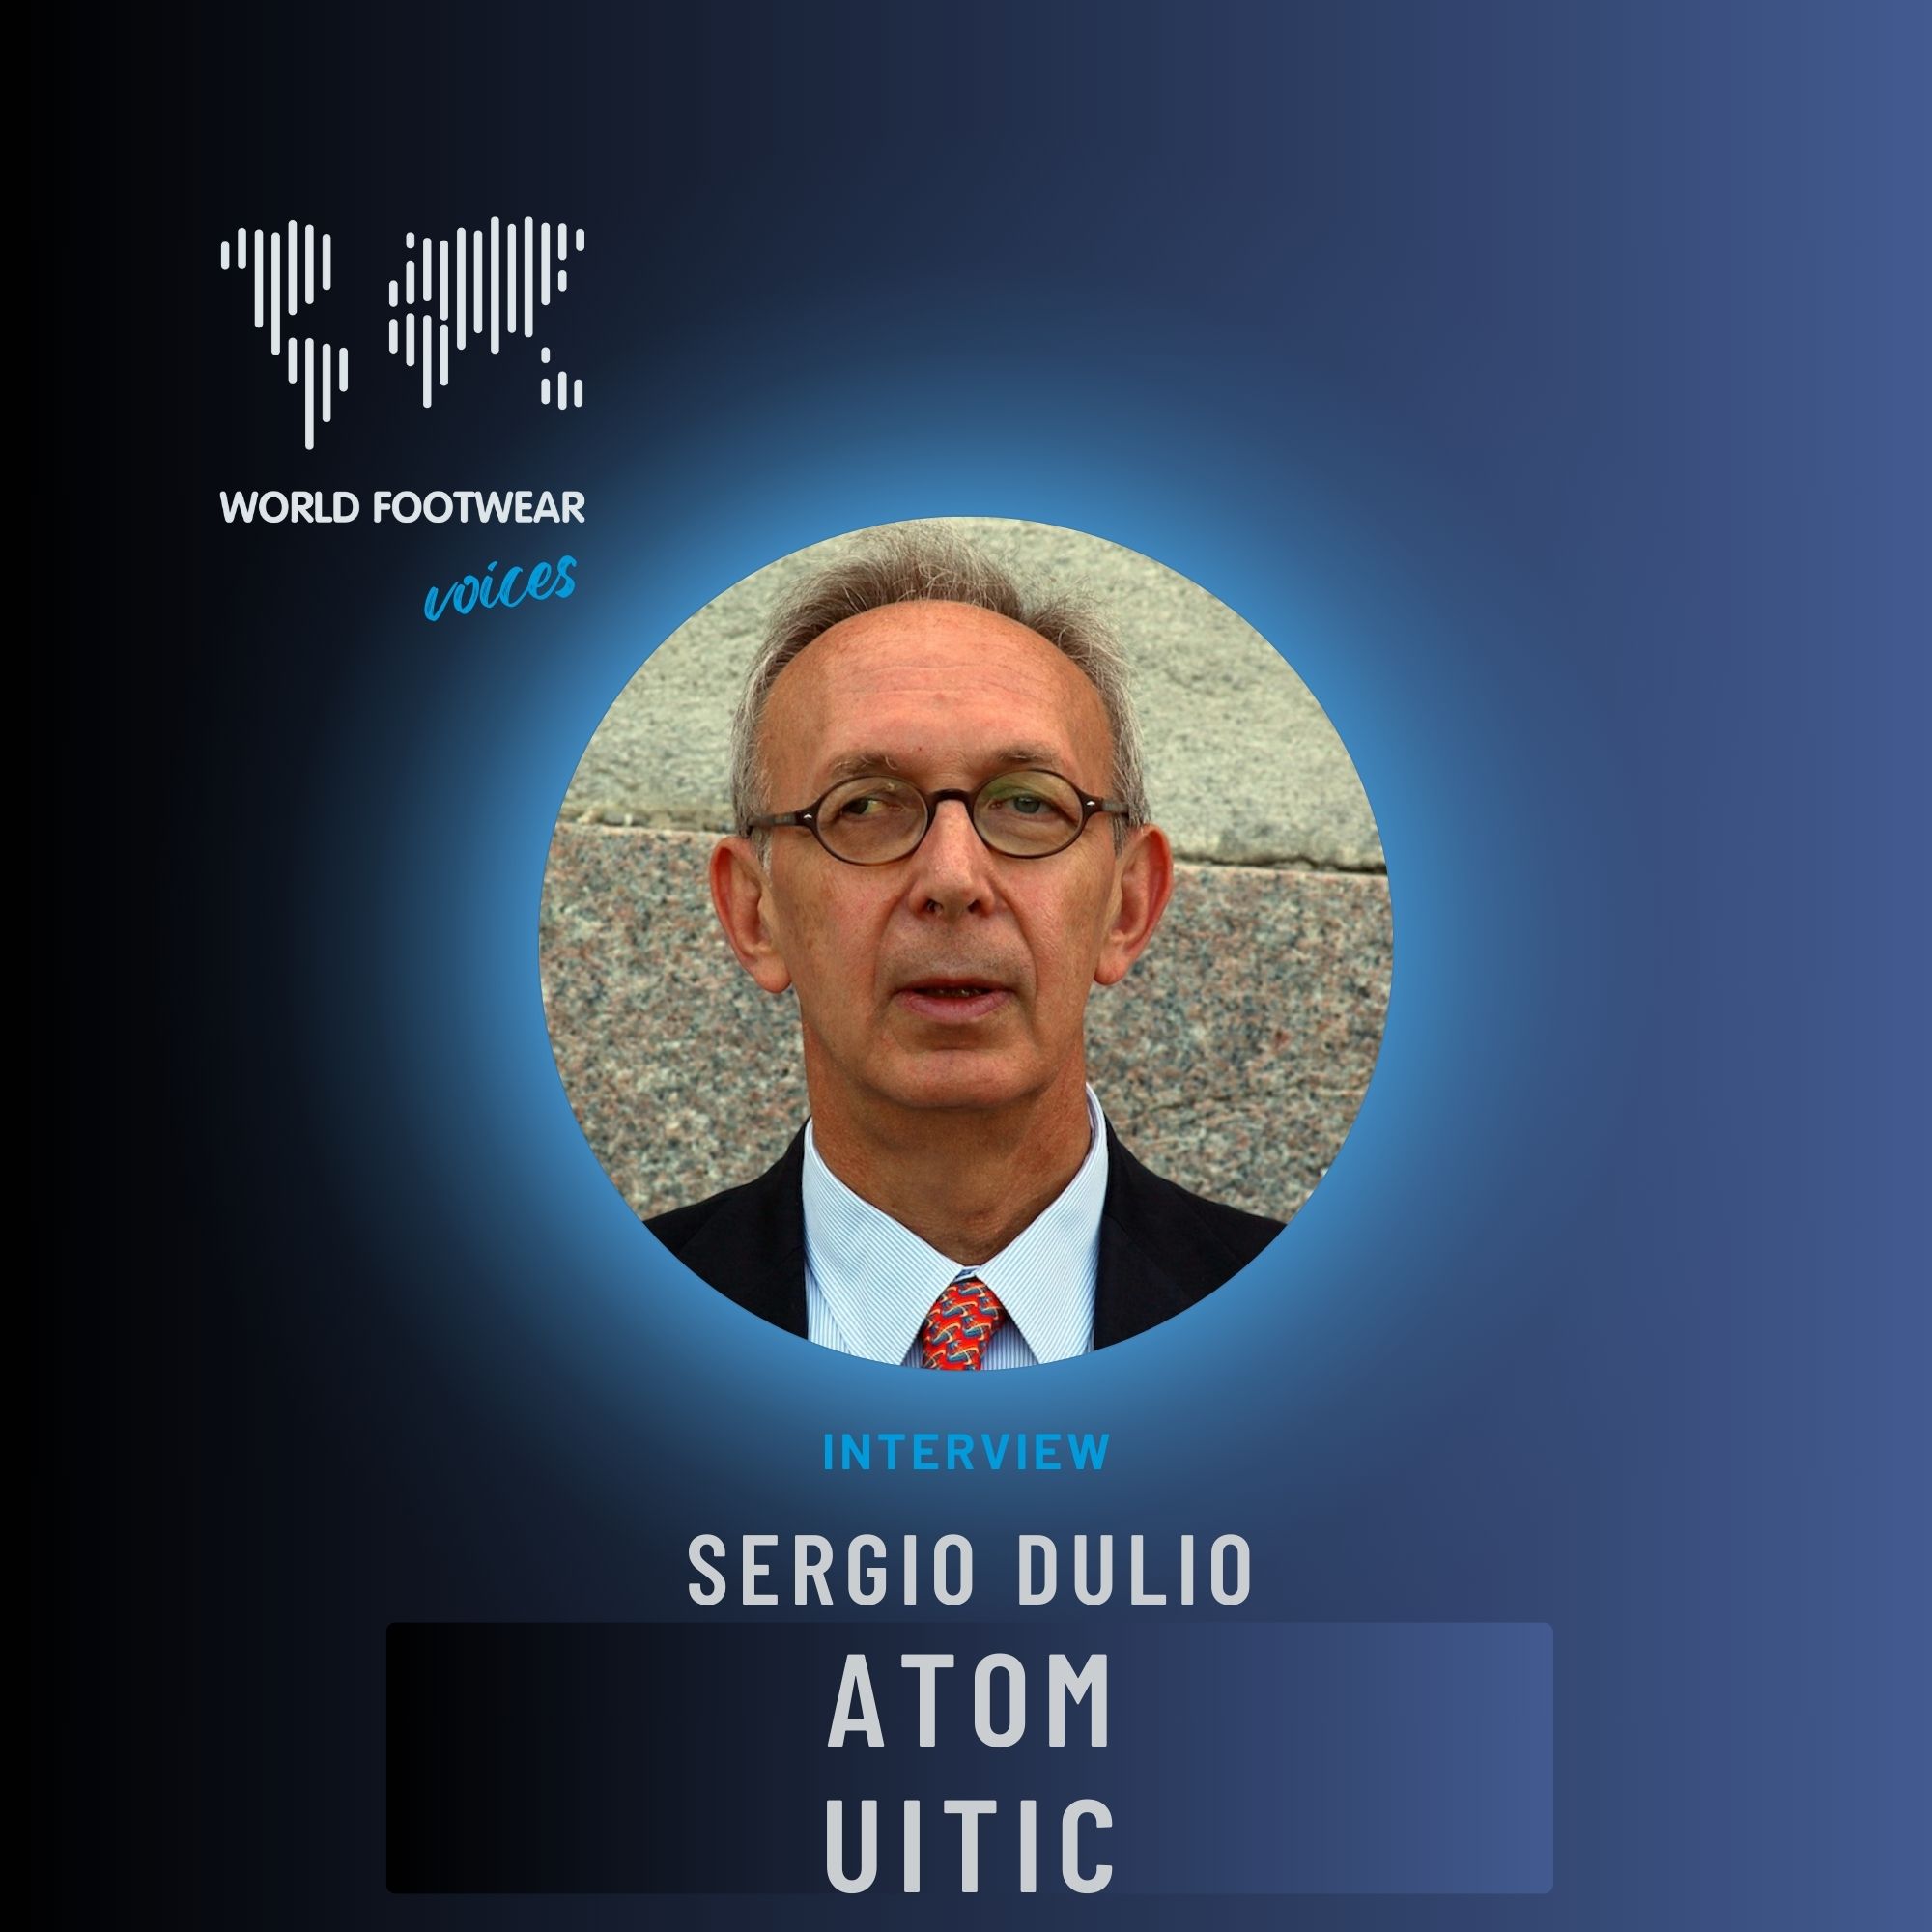 World Footwear Voices: interview with Sergio Dulio from UITIC